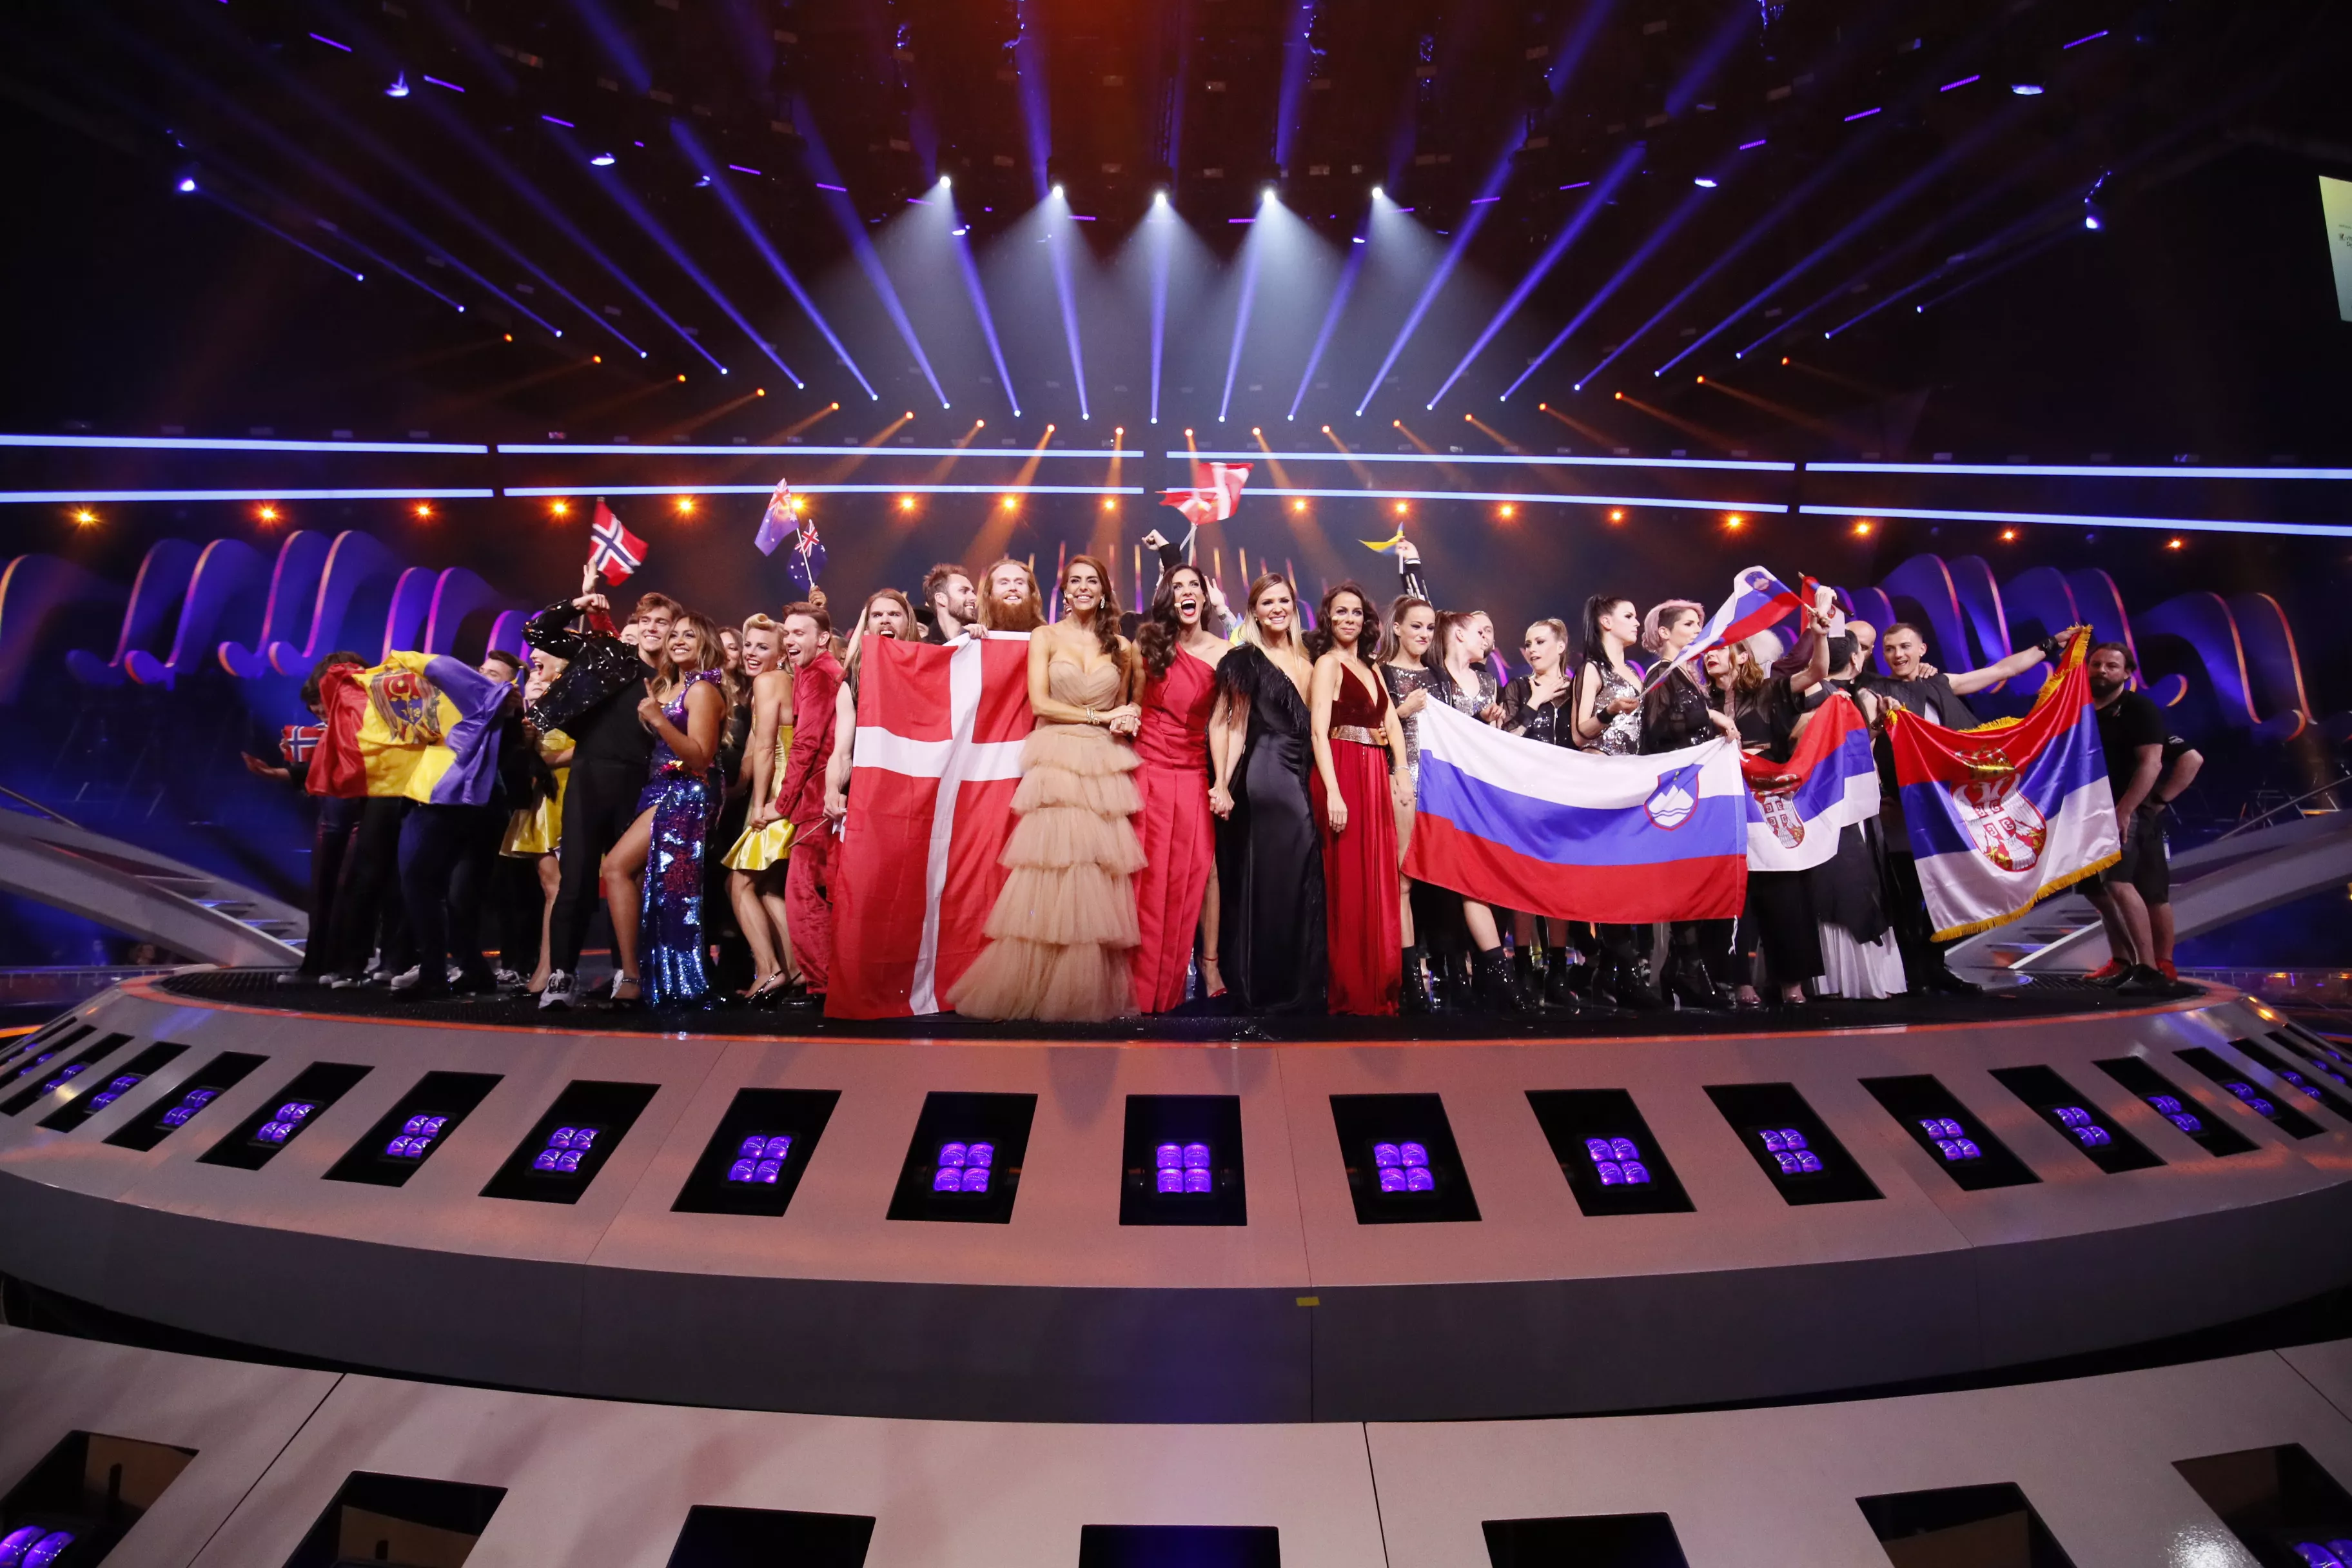 The UK hosts official Eurovision events in several cities